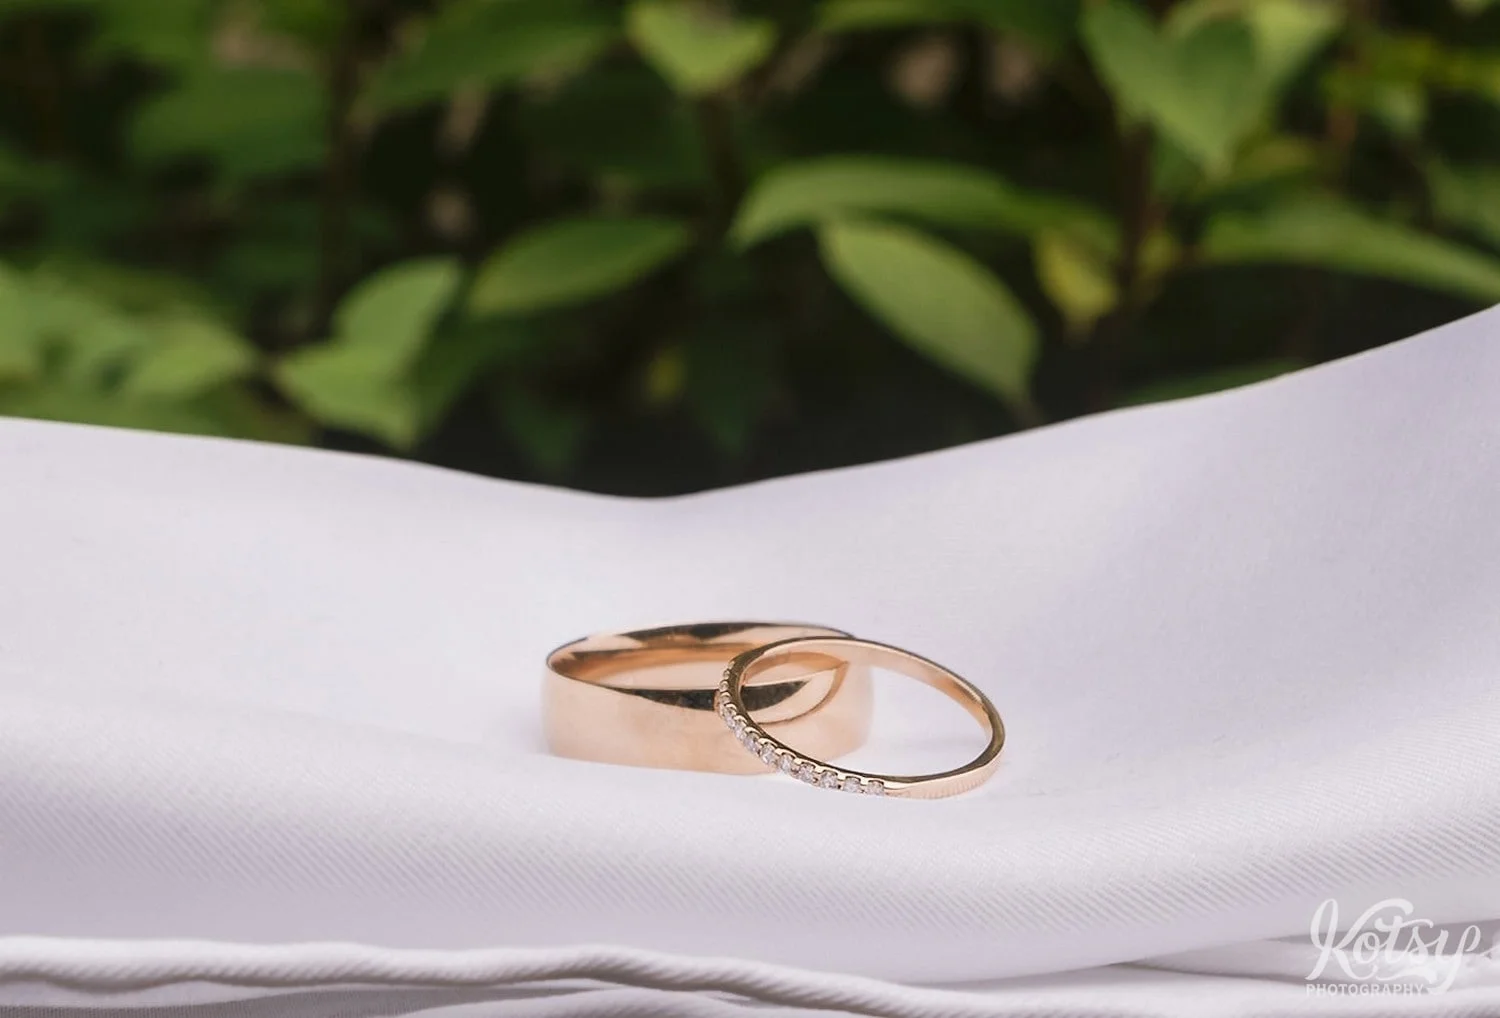 Two wedding bands are seen on a white cloth with green plants in the background